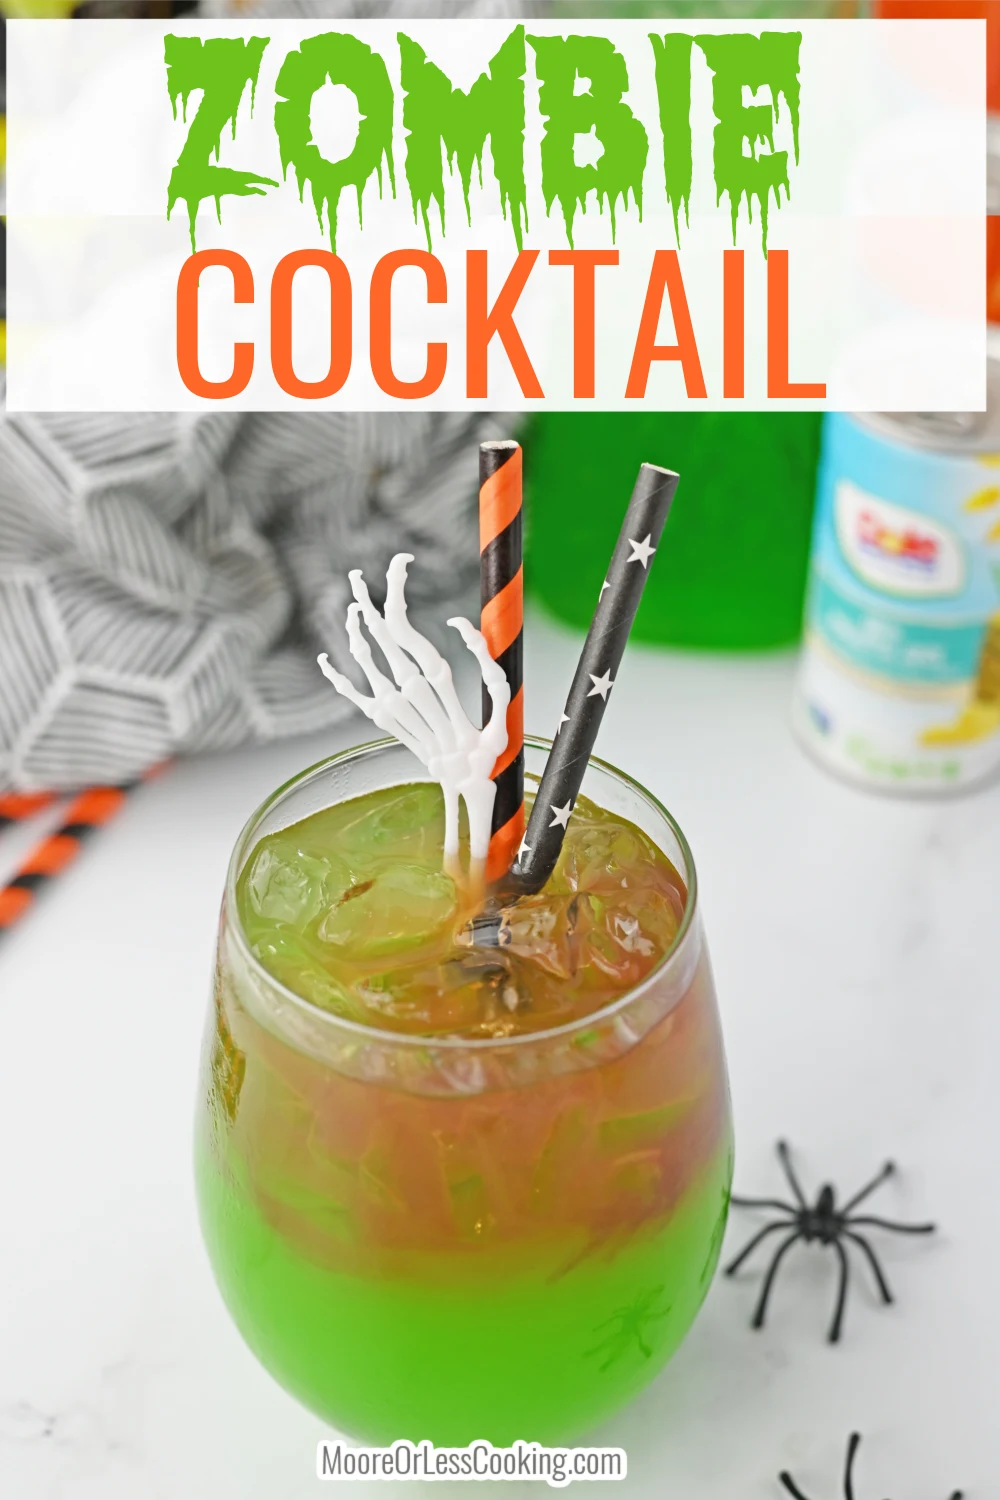 Full of fruity flavors, this spirited drink packs a punch and keeps it boozy with the addition of vodka and liqueurs of Midori and blue curacao. The ingredients used not only add alcohol and fruitiness but help add color to this cocktail that's always a hit for Halloween. via @Mooreorlesscook